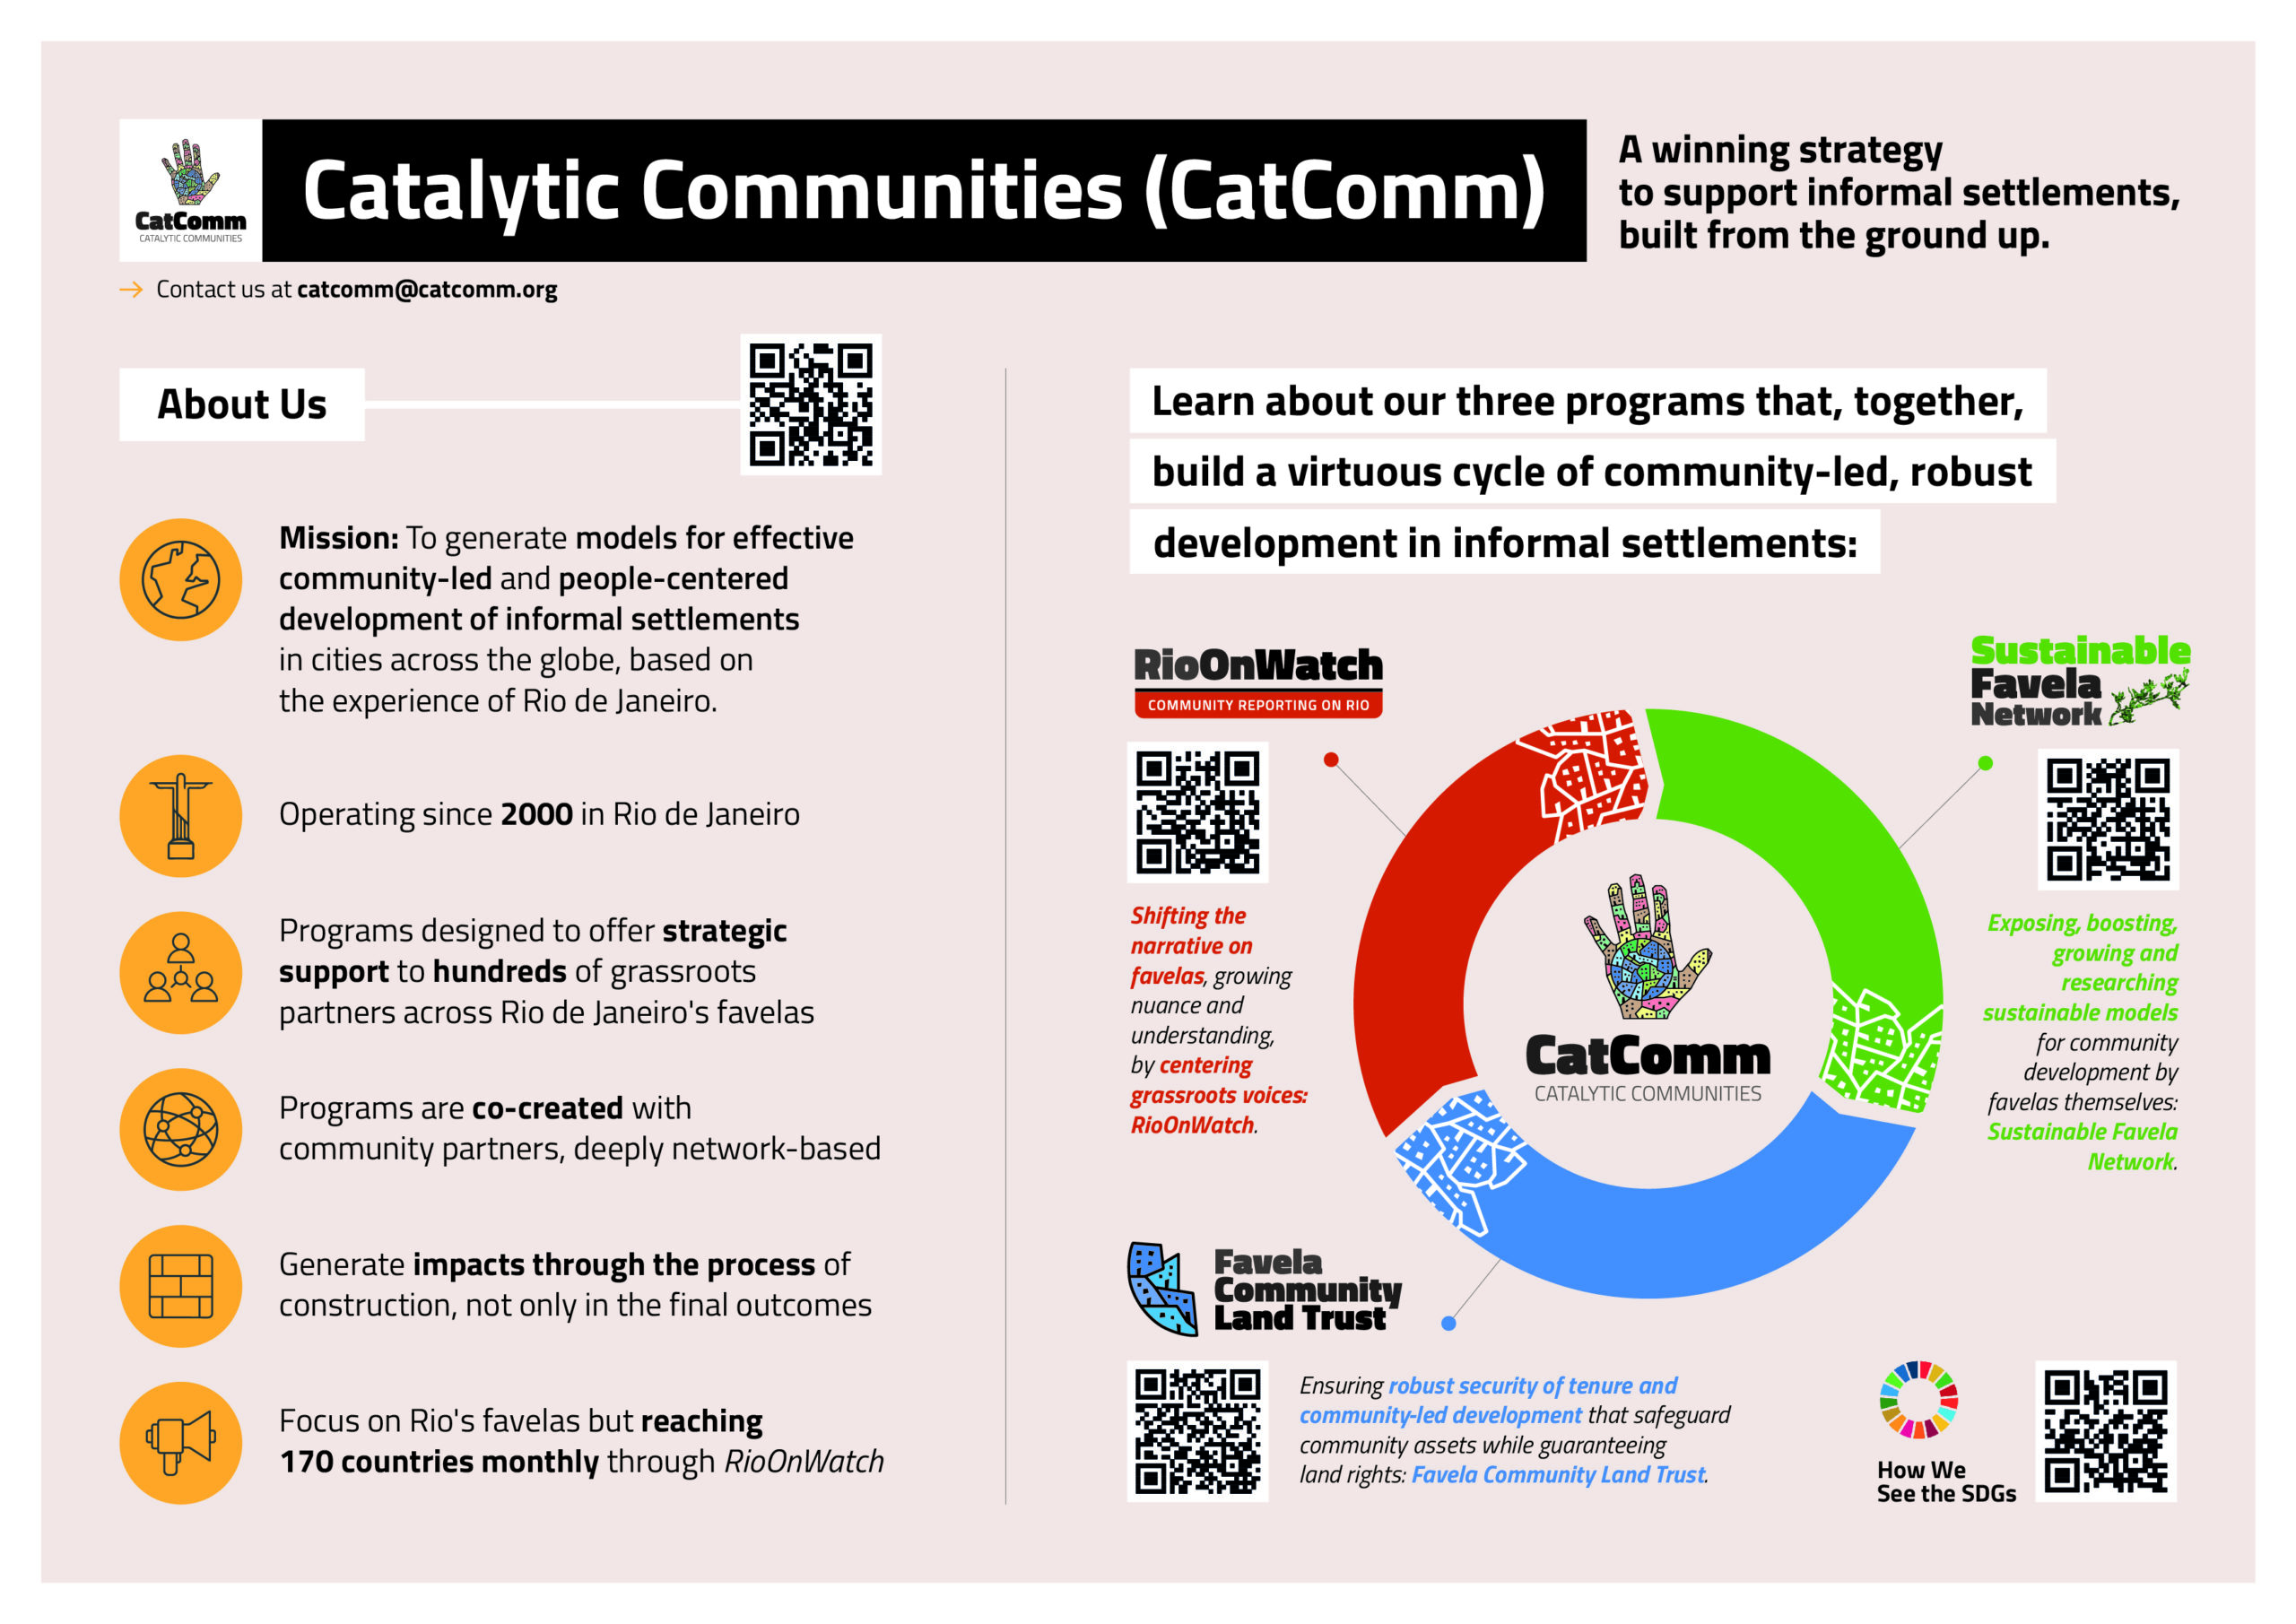 'Get to Know CatComm' infographic